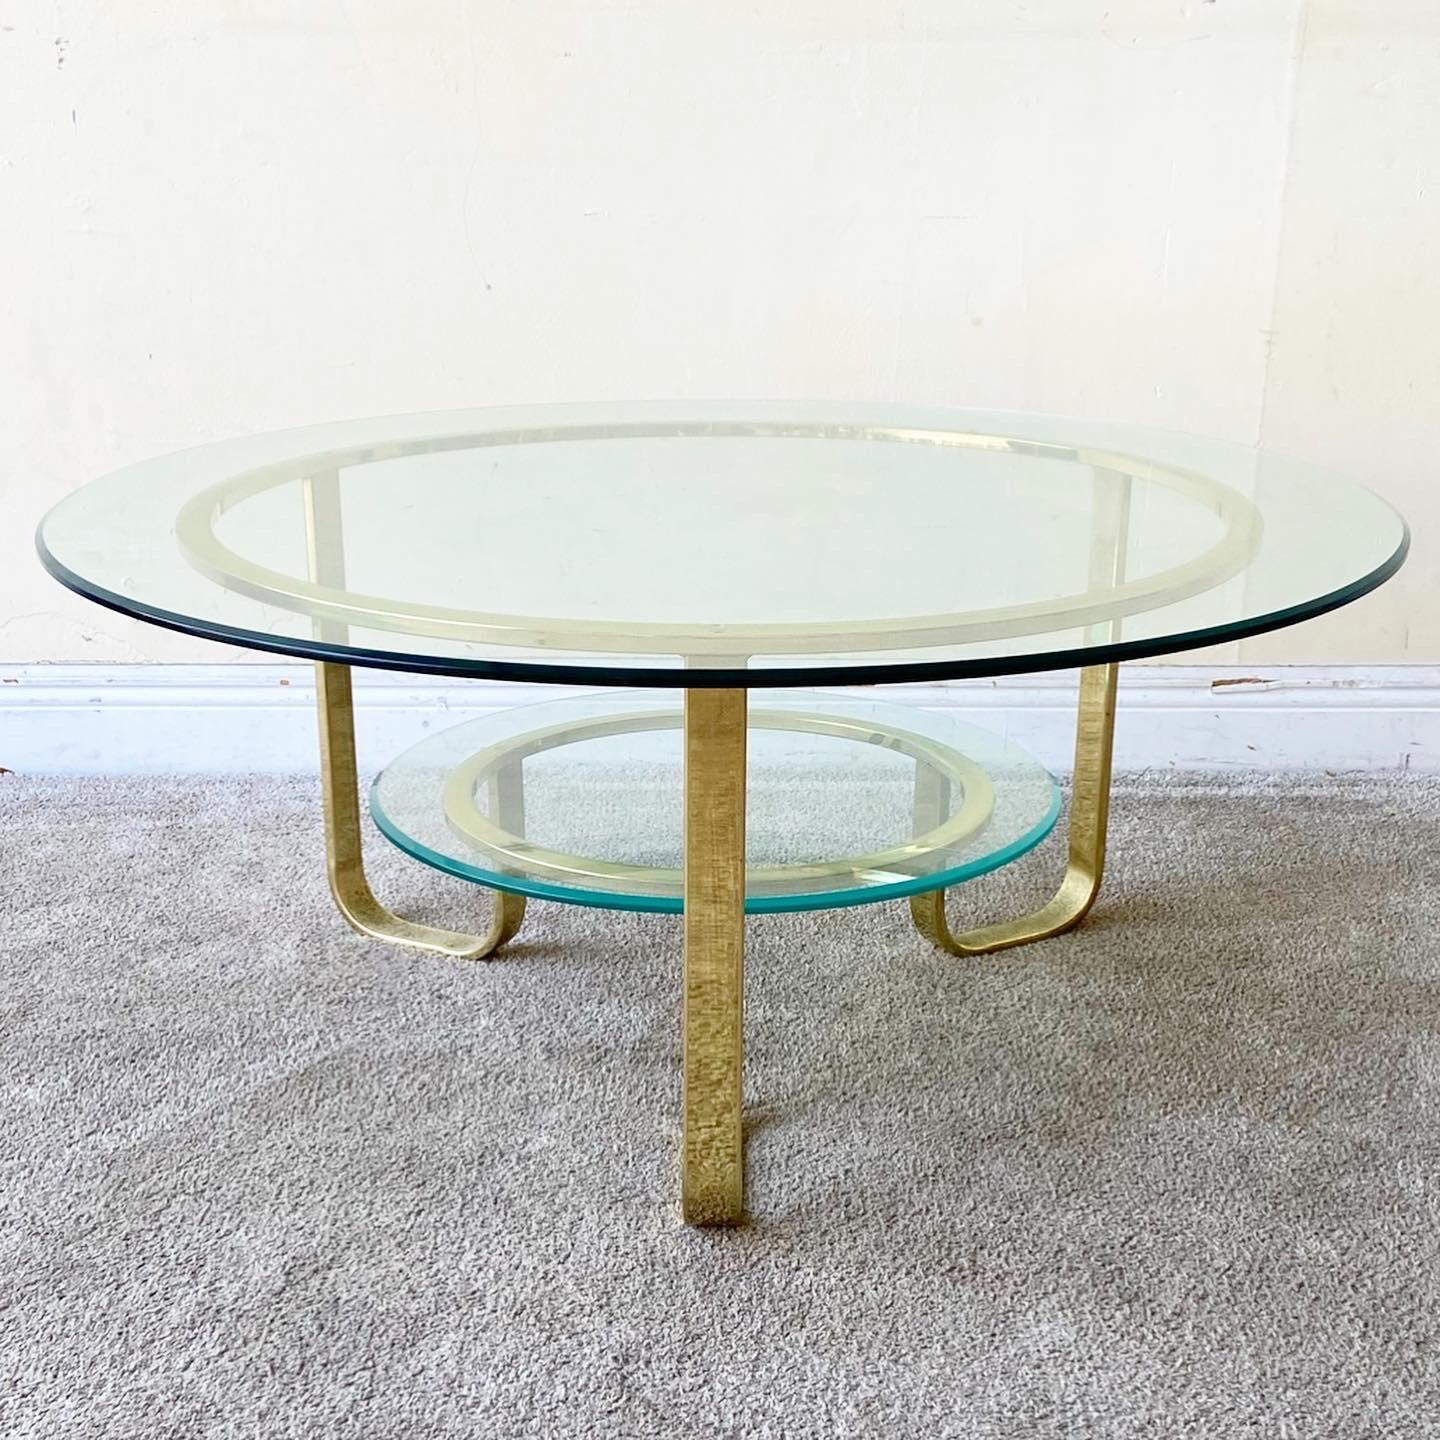 Amazing mid century modern two tier circular coffee table. Features a gold frame a two circular glass tops.